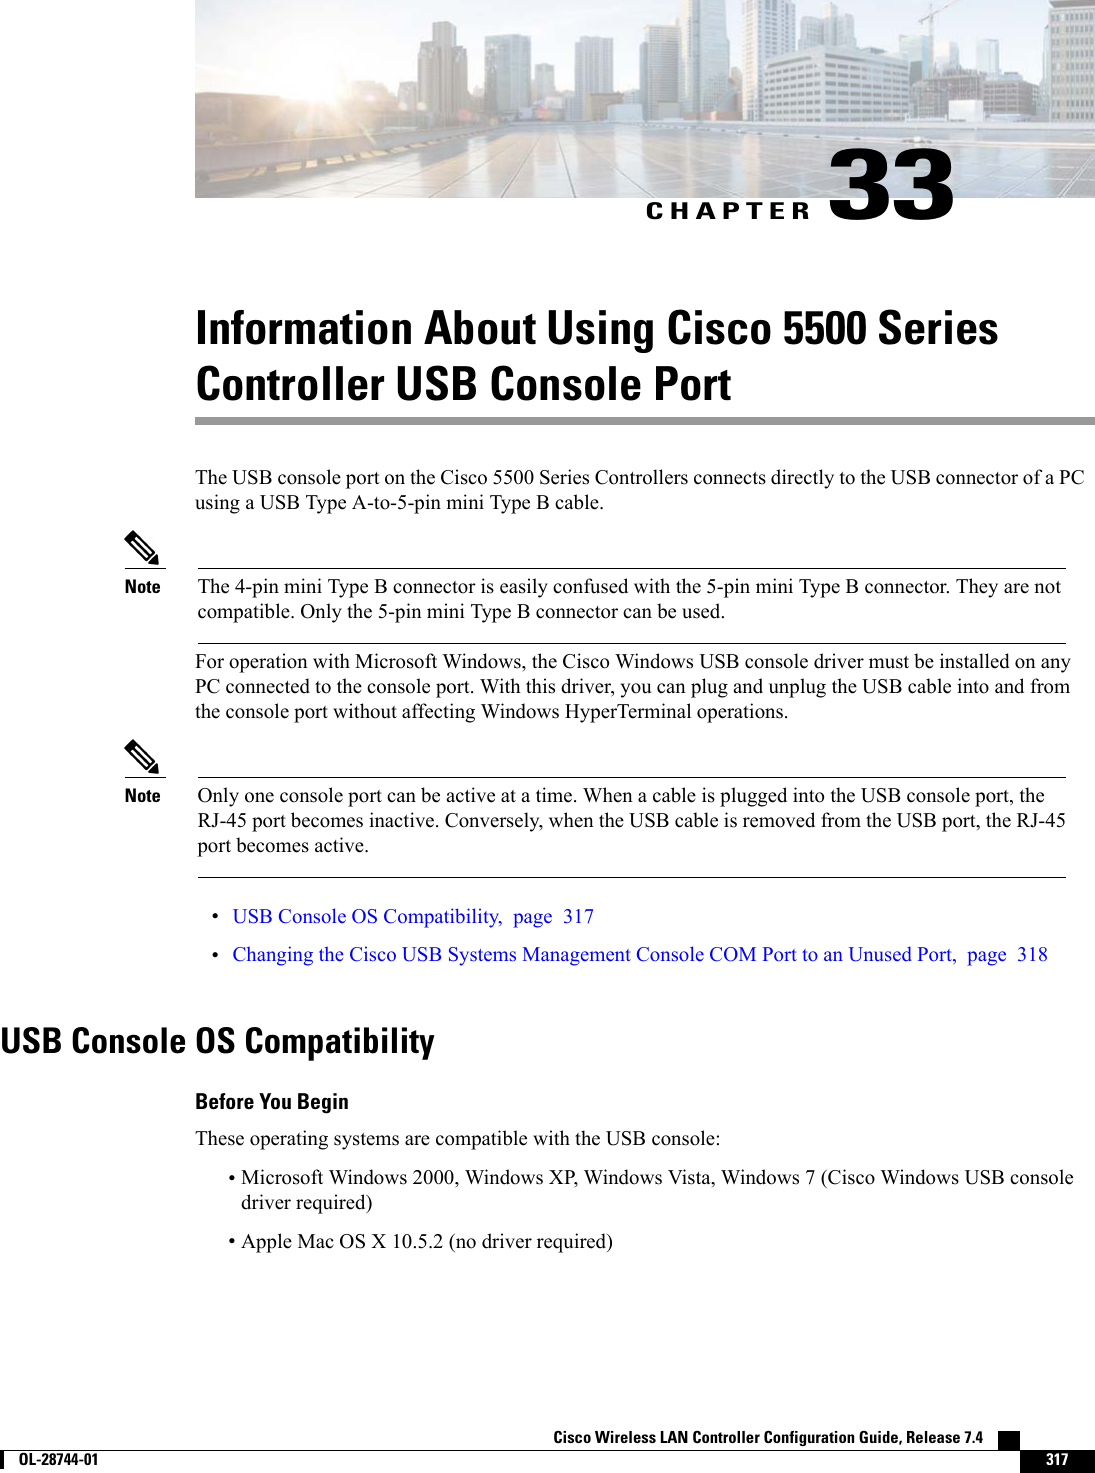 CHAPTER 33Information About Using Cisco 5500 SeriesController USB Console PortThe USB console port on the Cisco 5500 Series Controllers connects directly to the USB connector of a PCusing a USB Type A-to-5-pin mini Type B cable.The 4-pin mini Type B connector is easily confused with the 5-pin mini Type B connector. They are notcompatible. Only the 5-pin mini Type B connector can be used.NoteFor operation with Microsoft Windows, the Cisco Windows USB console driver must be installed on anyPC connected to the console port. With this driver, you can plug and unplug the USB cable into and fromthe console port without affecting Windows HyperTerminal operations.Only one console port can be active at a time. When a cable is plugged into the USB console port, theRJ-45 port becomes inactive. Conversely, when the USB cable is removed from the USB port, the RJ-45port becomes active.Note•USB Console OS Compatibility, page 317•Changing the Cisco USB Systems Management Console COM Port to an Unused Port, page 318USB Console OS CompatibilityBefore You BeginThese operating systems are compatible with the USB console:•Microsoft Windows 2000, Windows XP, Windows Vista, Windows 7 (Cisco Windows USB consoledriver required)•Apple Mac OS X 10.5.2 (no driver required)Cisco Wireless LAN Controller Configuration Guide, Release 7.4        OL-28744-01 317